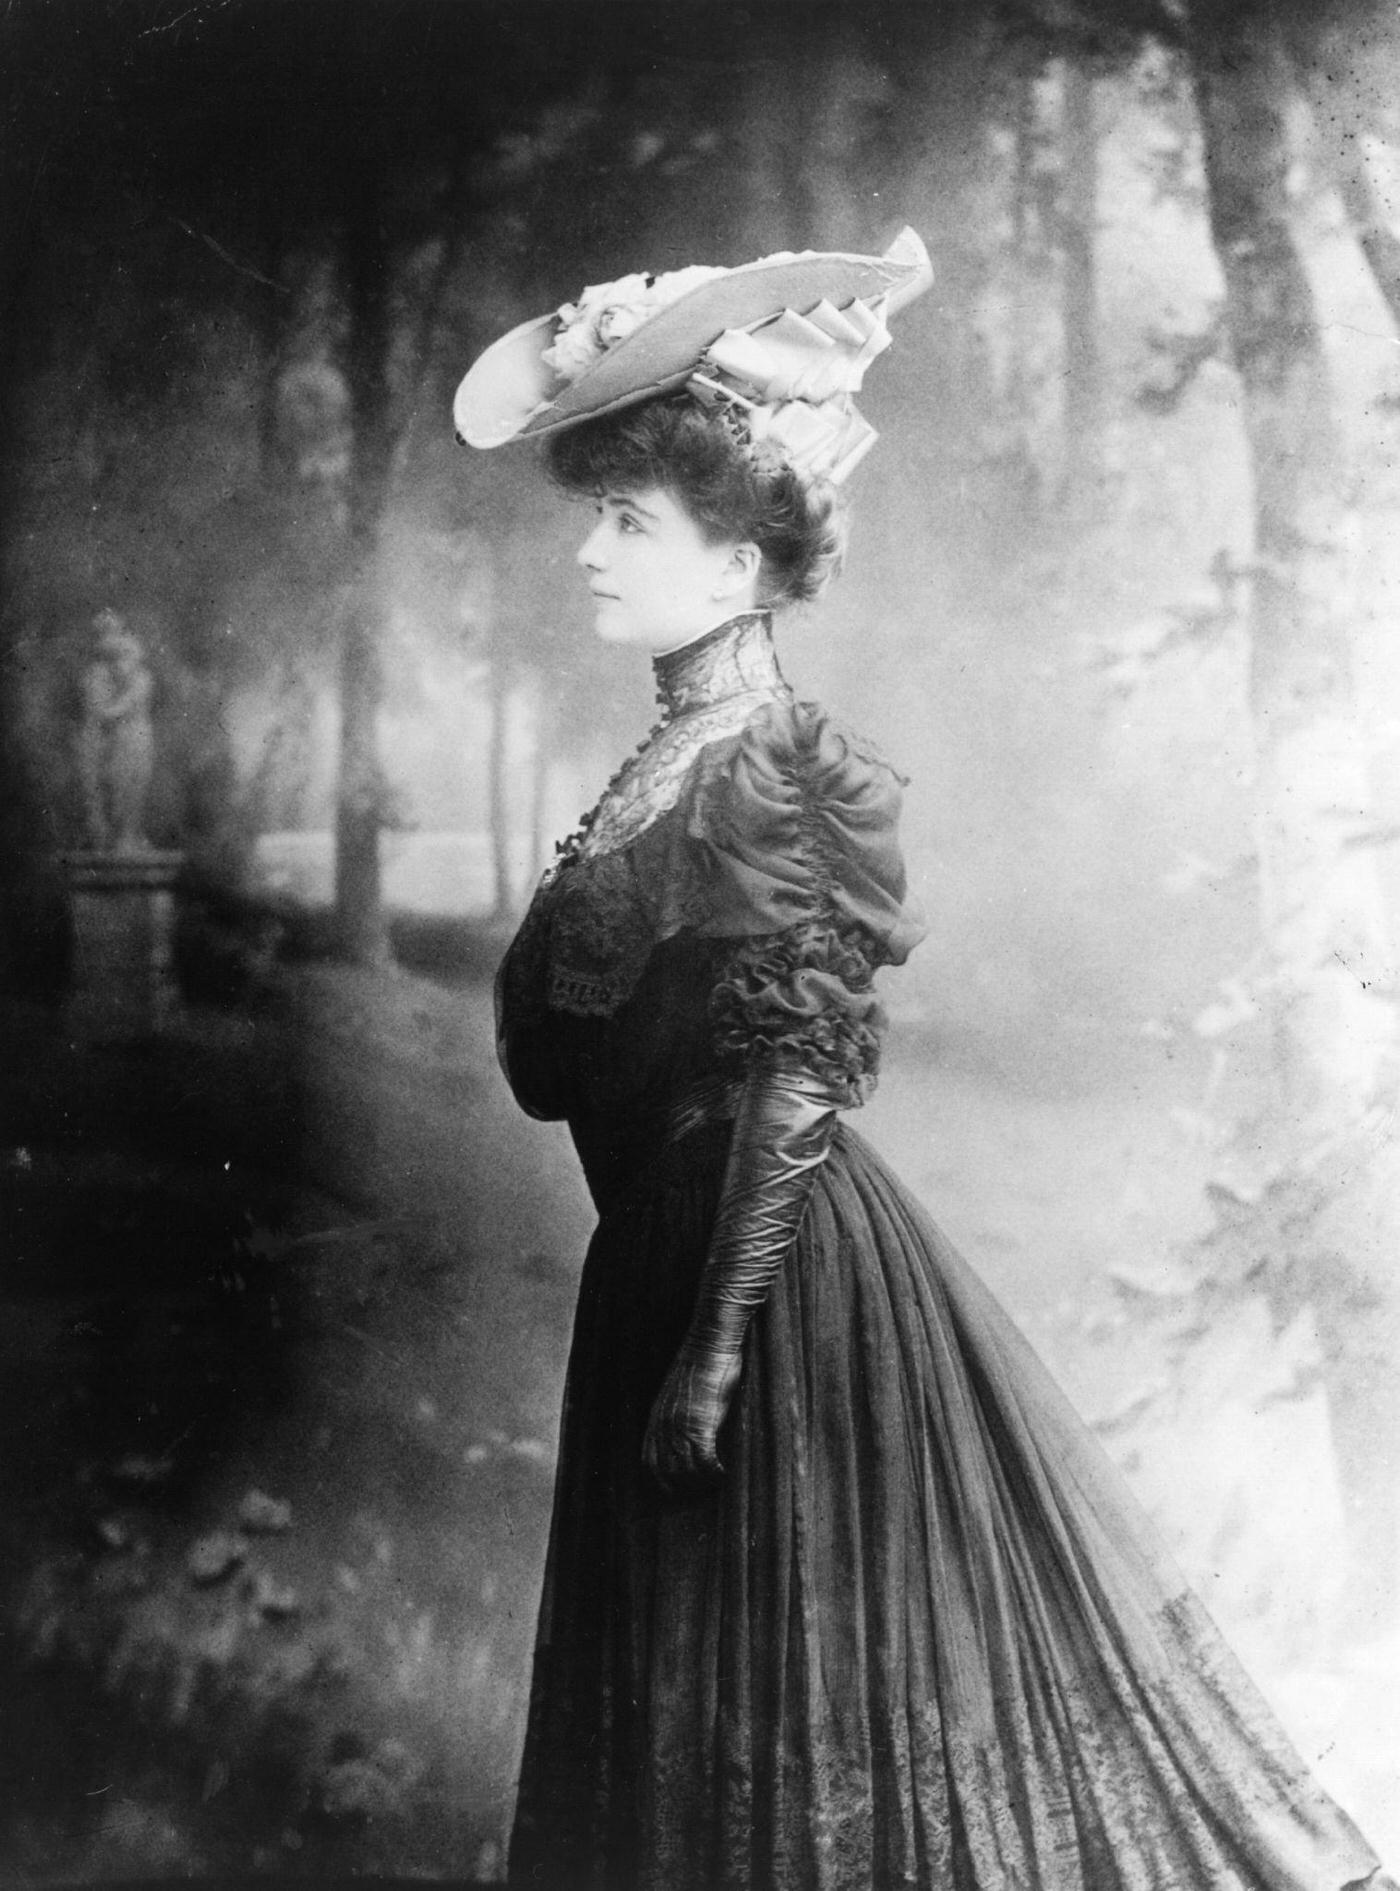 An elegant white lace hat with feather trimming from the Edwardian era